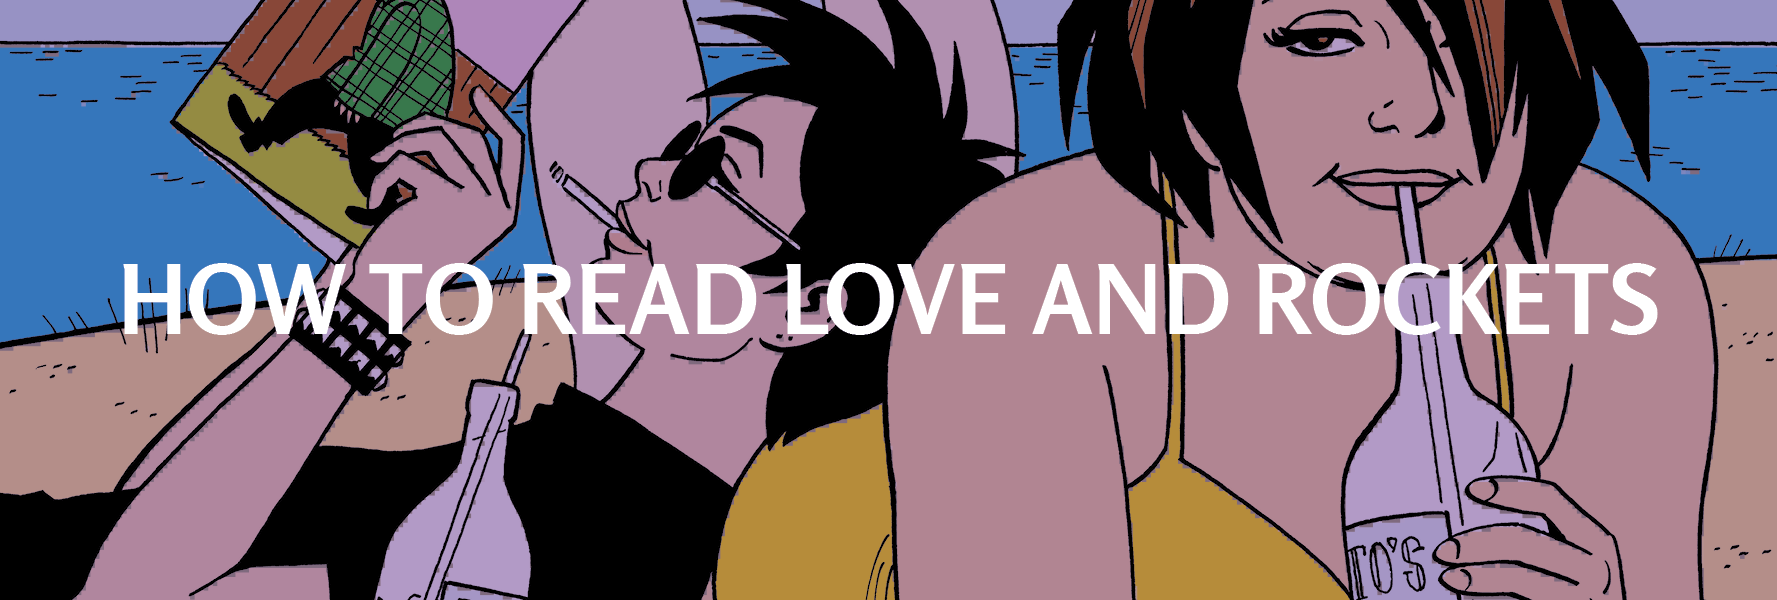 Love and Rockets Reading Order, by the Hernandez brothers - Comic